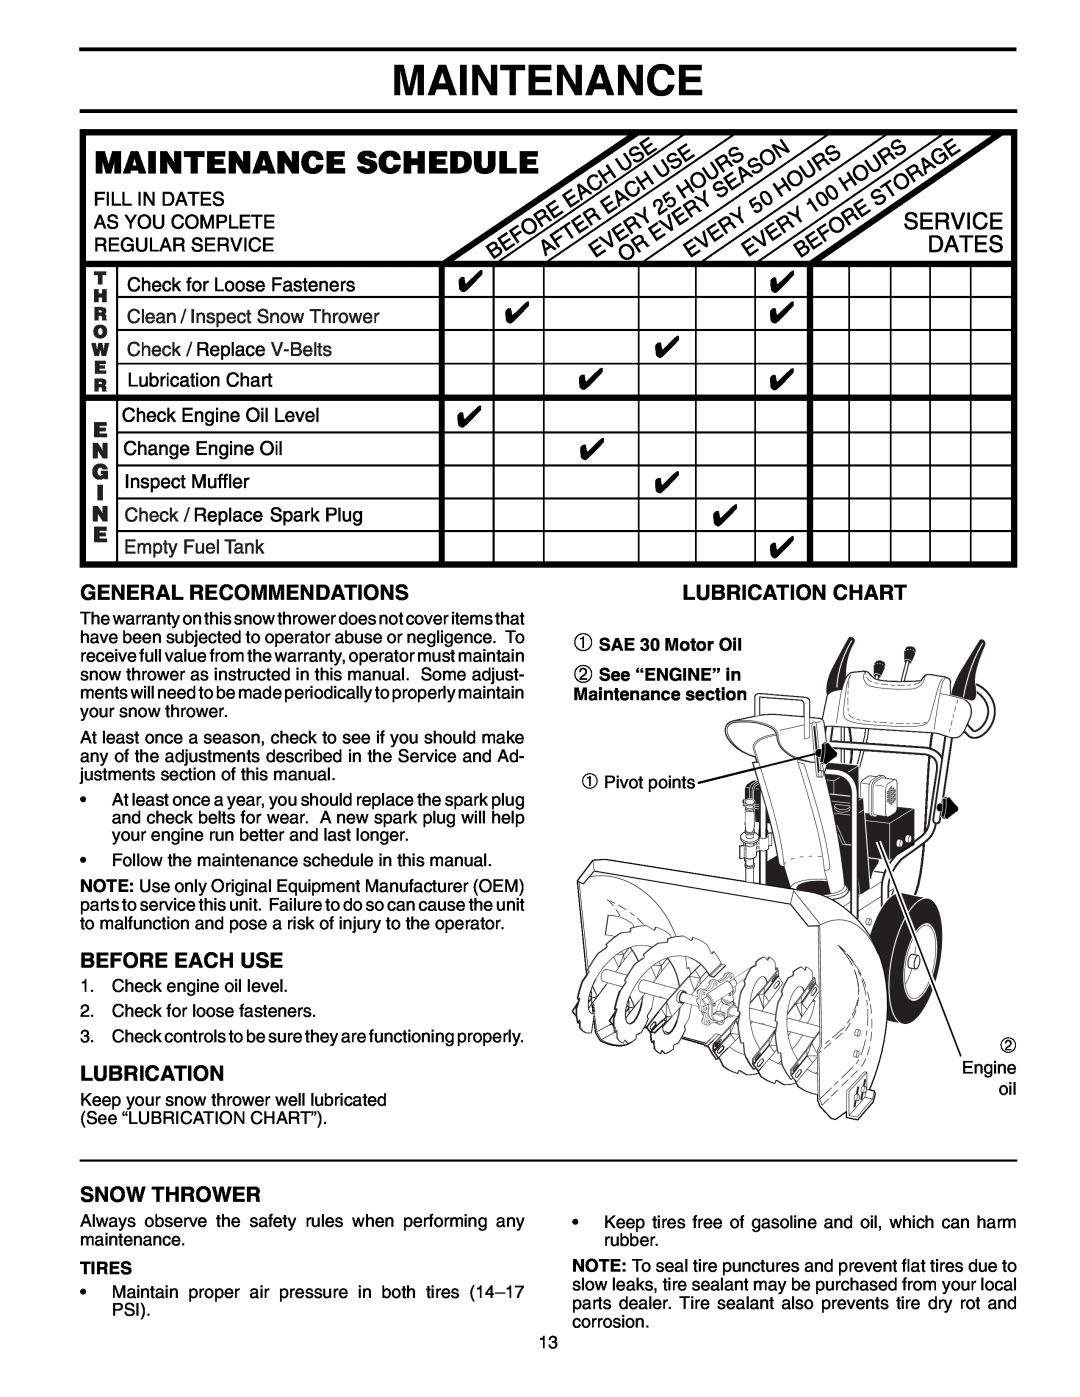 Husqvarna 5524SEB Maintenance, General Recommendations, Before Each Use, Snow Thrower, Lubrication Chart, Tires 